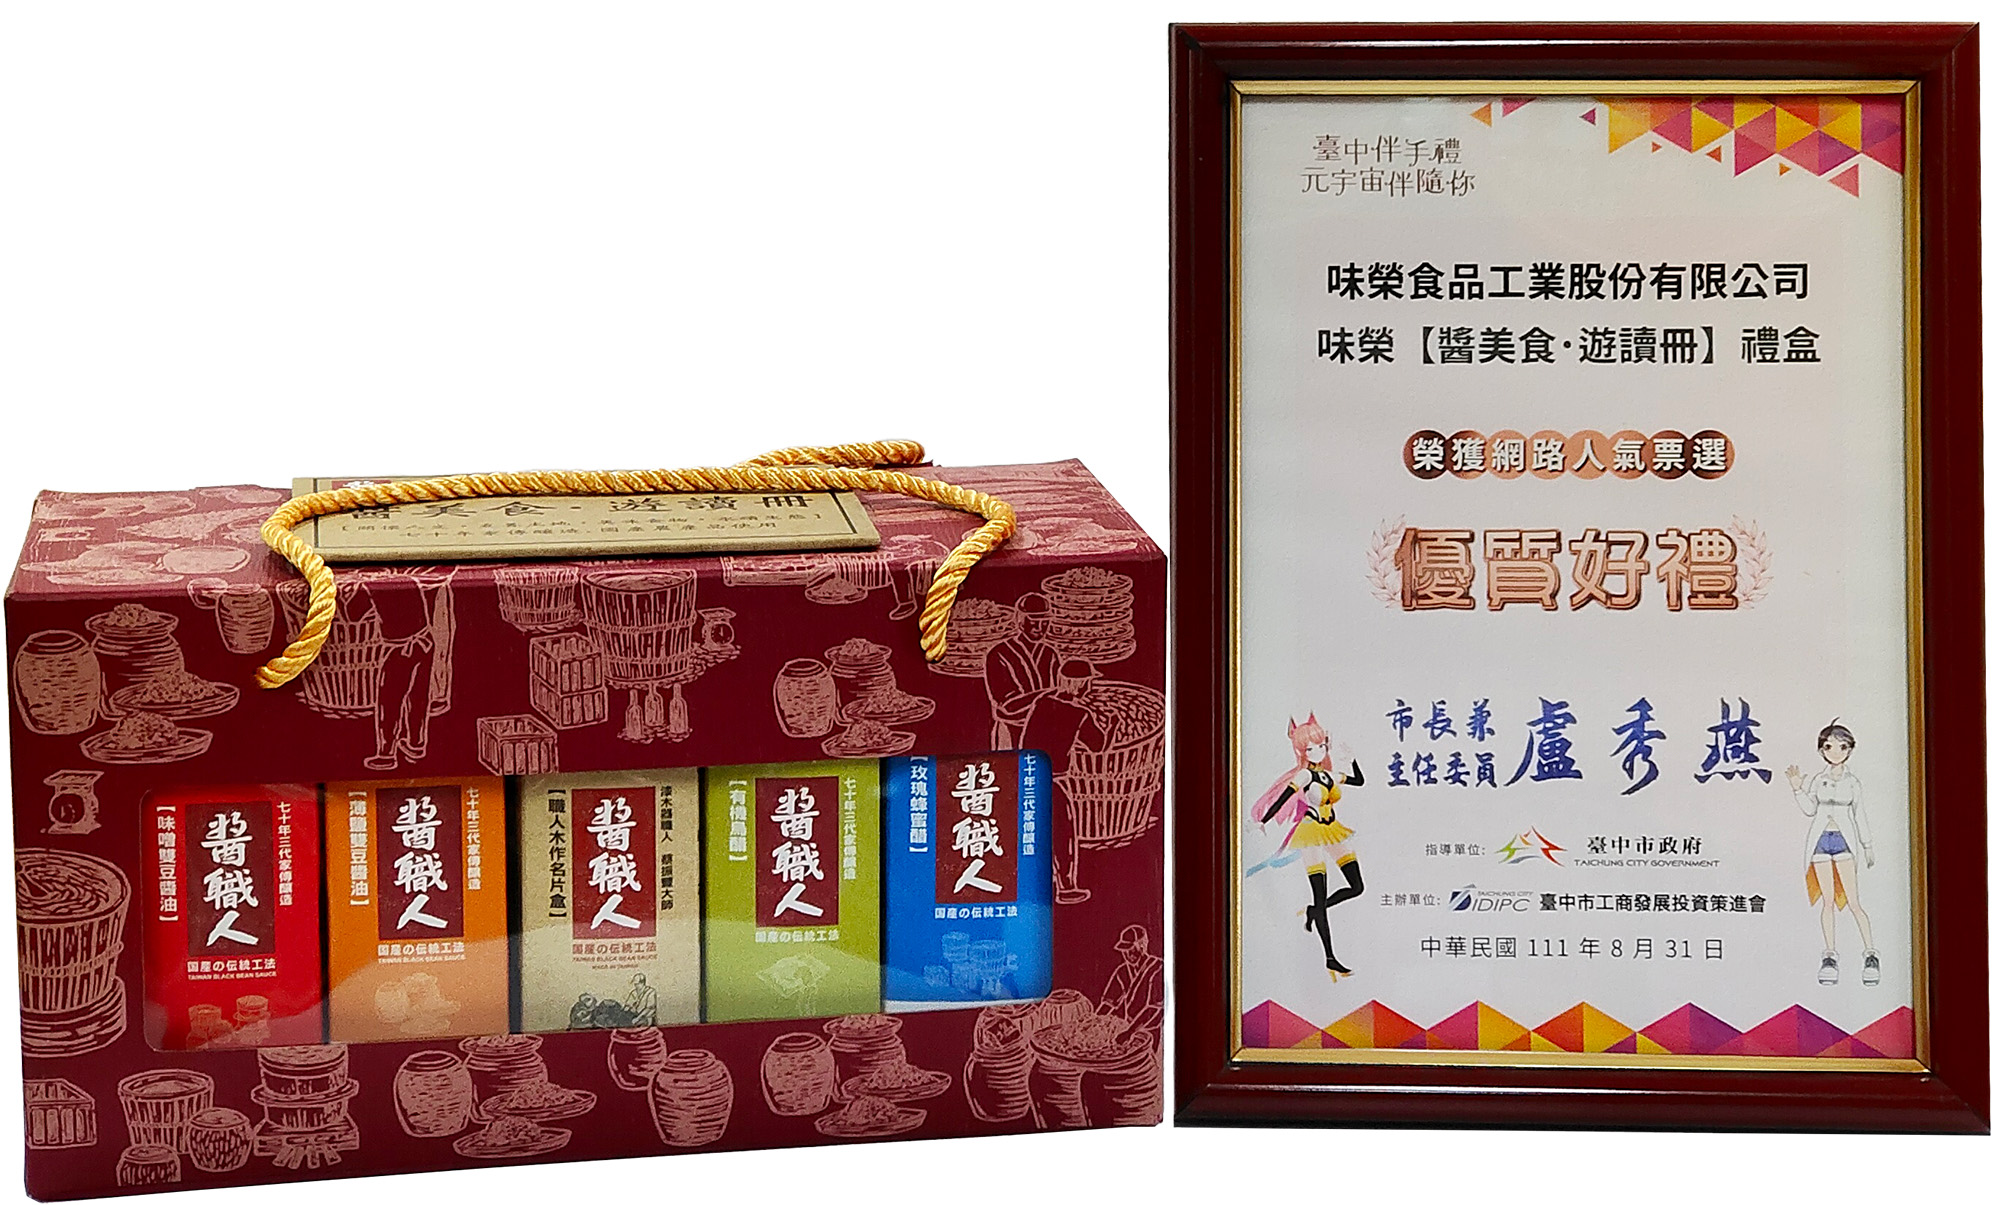 [Sauce Food Travel Reading Book Gift Box] Won the Taichung City Government’s online popularity vote as a high-quality gift